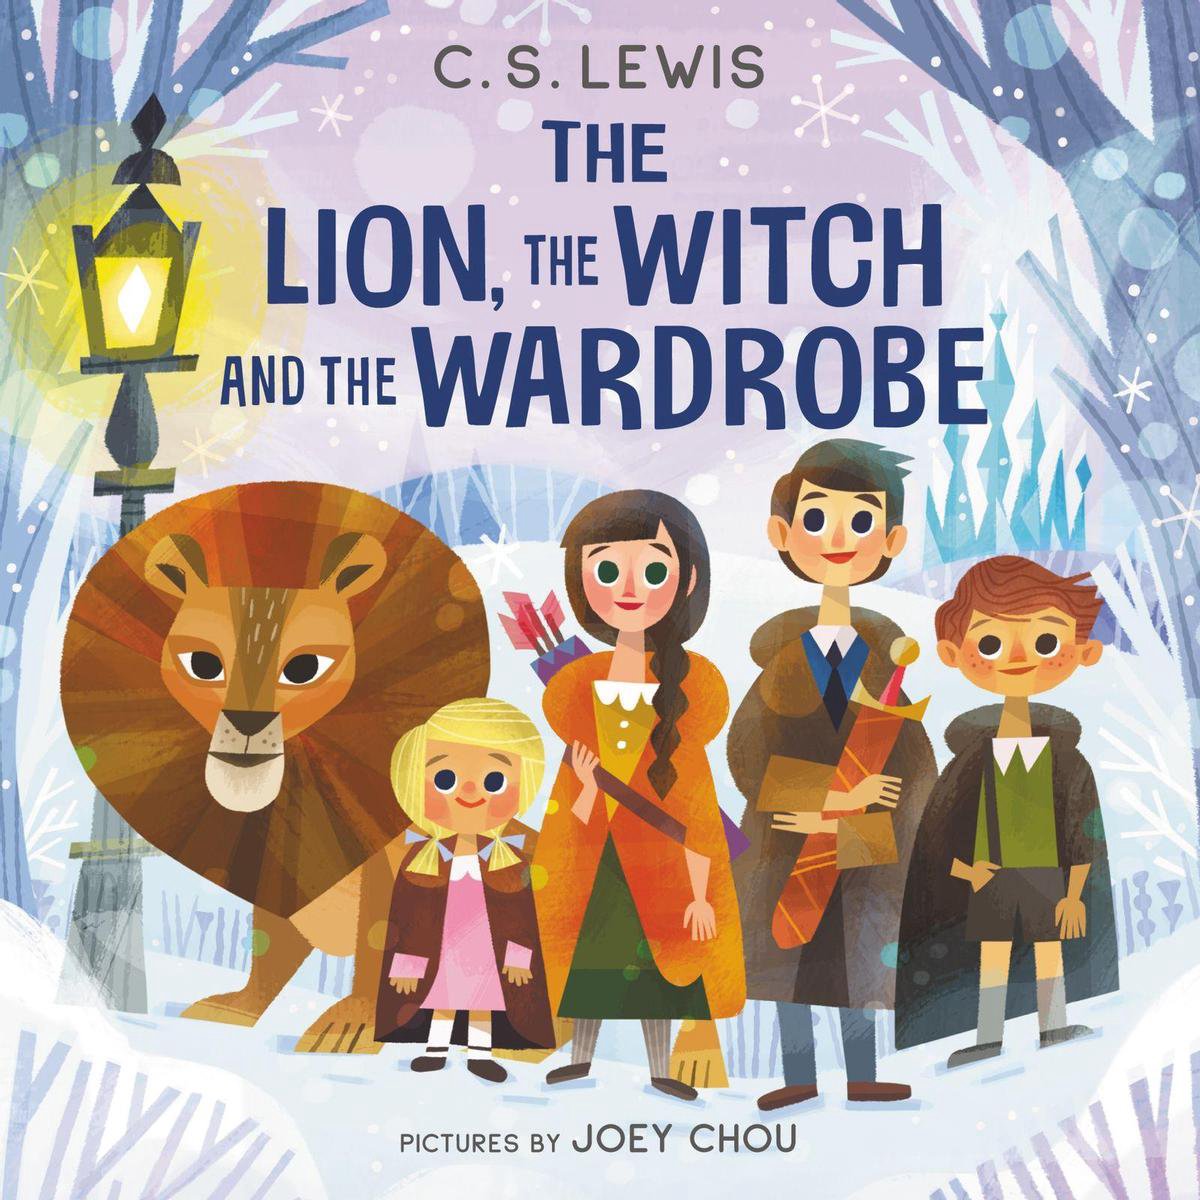 Chronicles of Narnia - The Lion, the Witch and the Wardrobe - C. S. Lewis